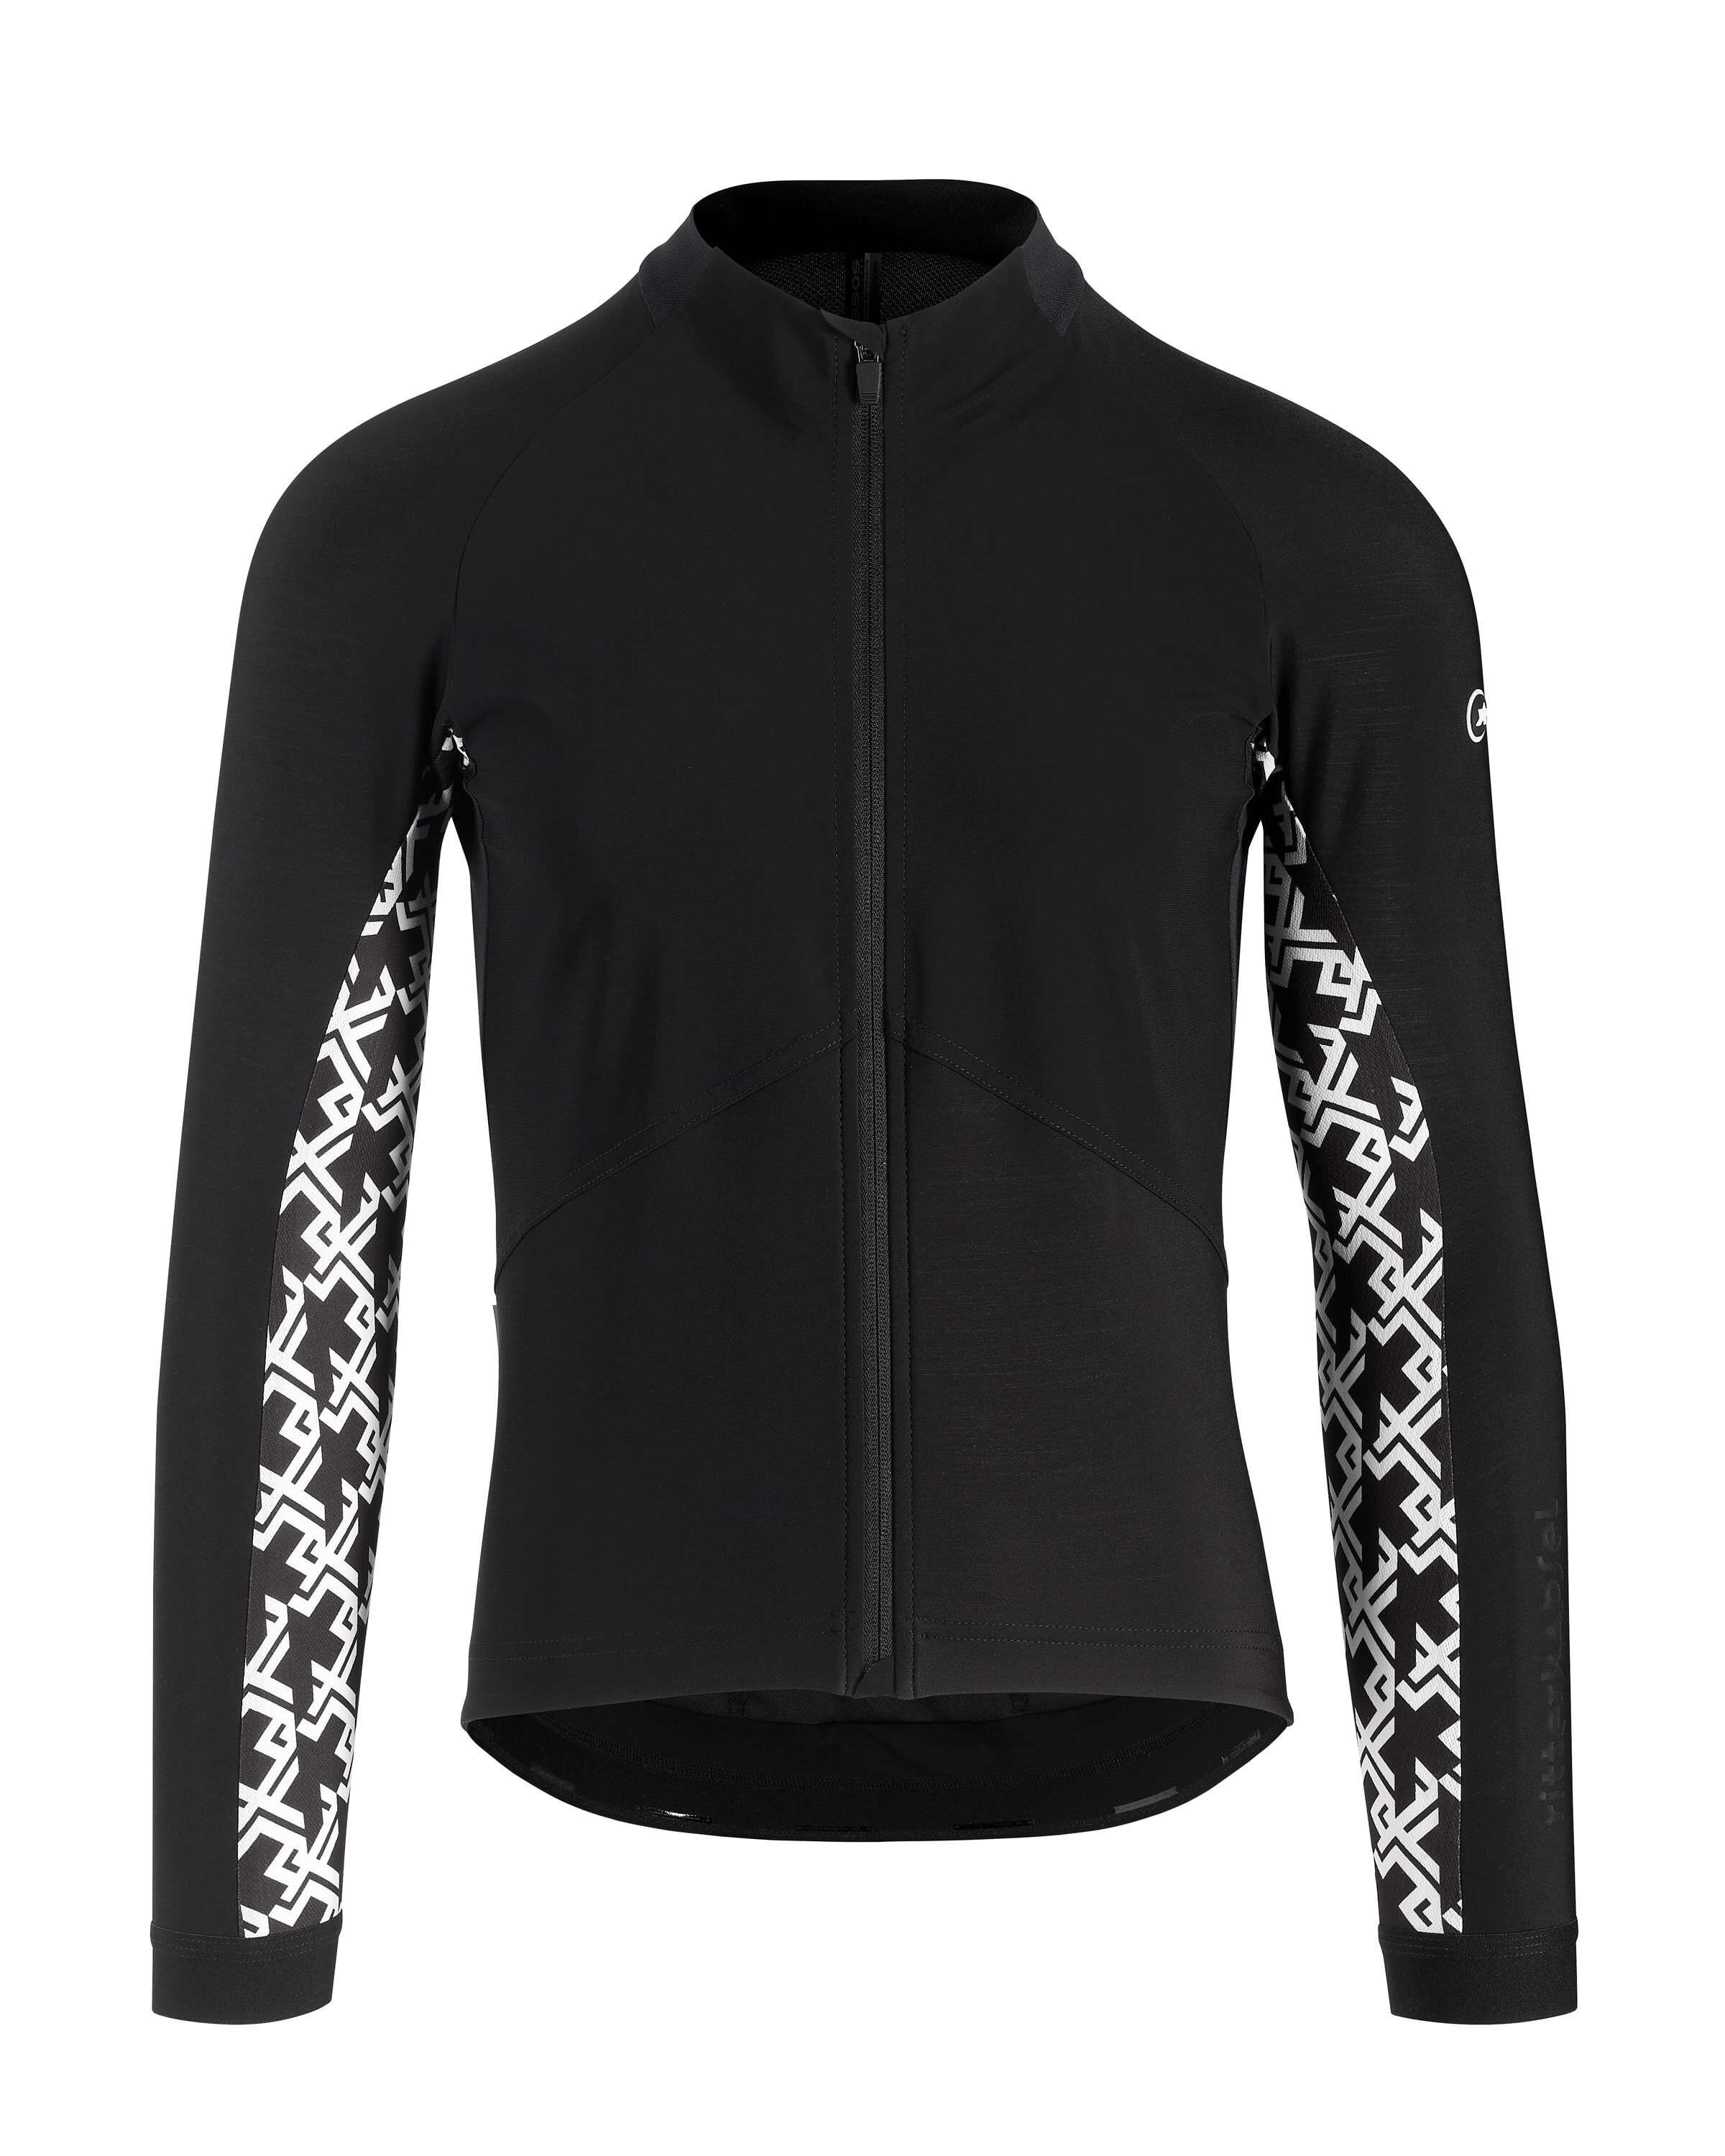 Assos Mille GT Spring Fall  Jacket  - Giacca ciclismo - Uomo